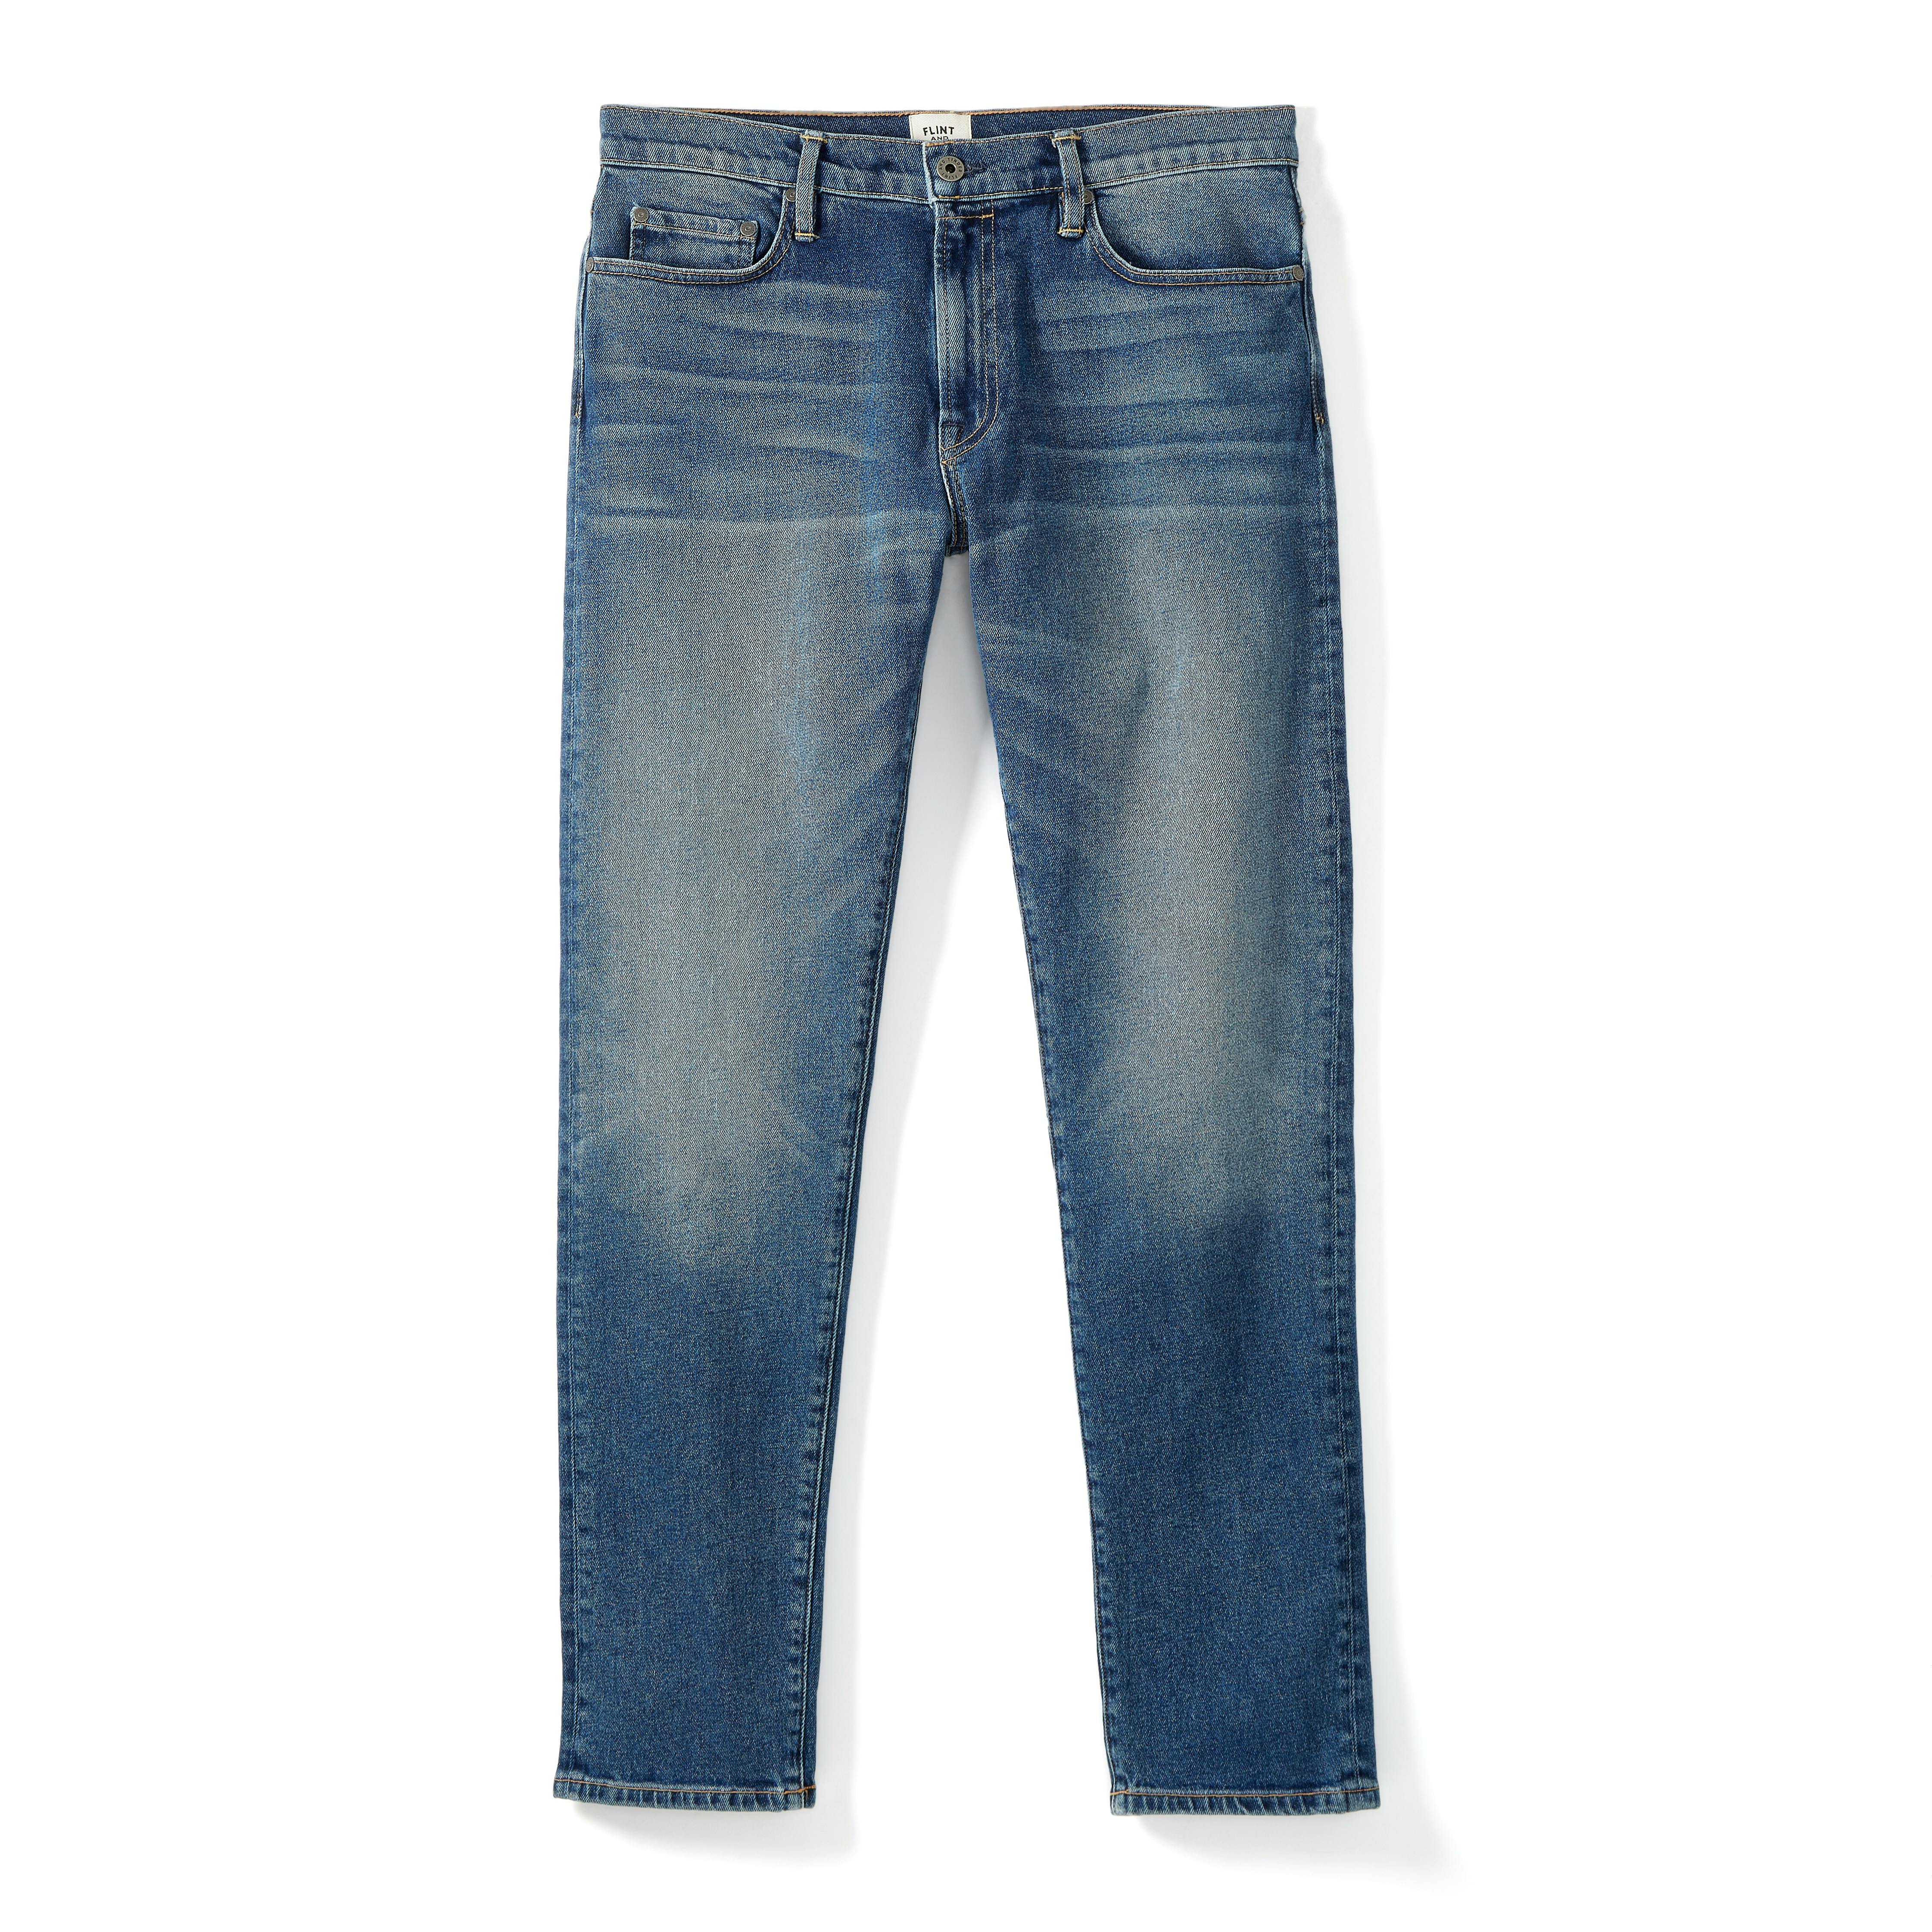 Flint and Tinder All-American - (1-Year Stretch Athletic - Medium | Denim Tapered | Jeans Huckberry Wash)